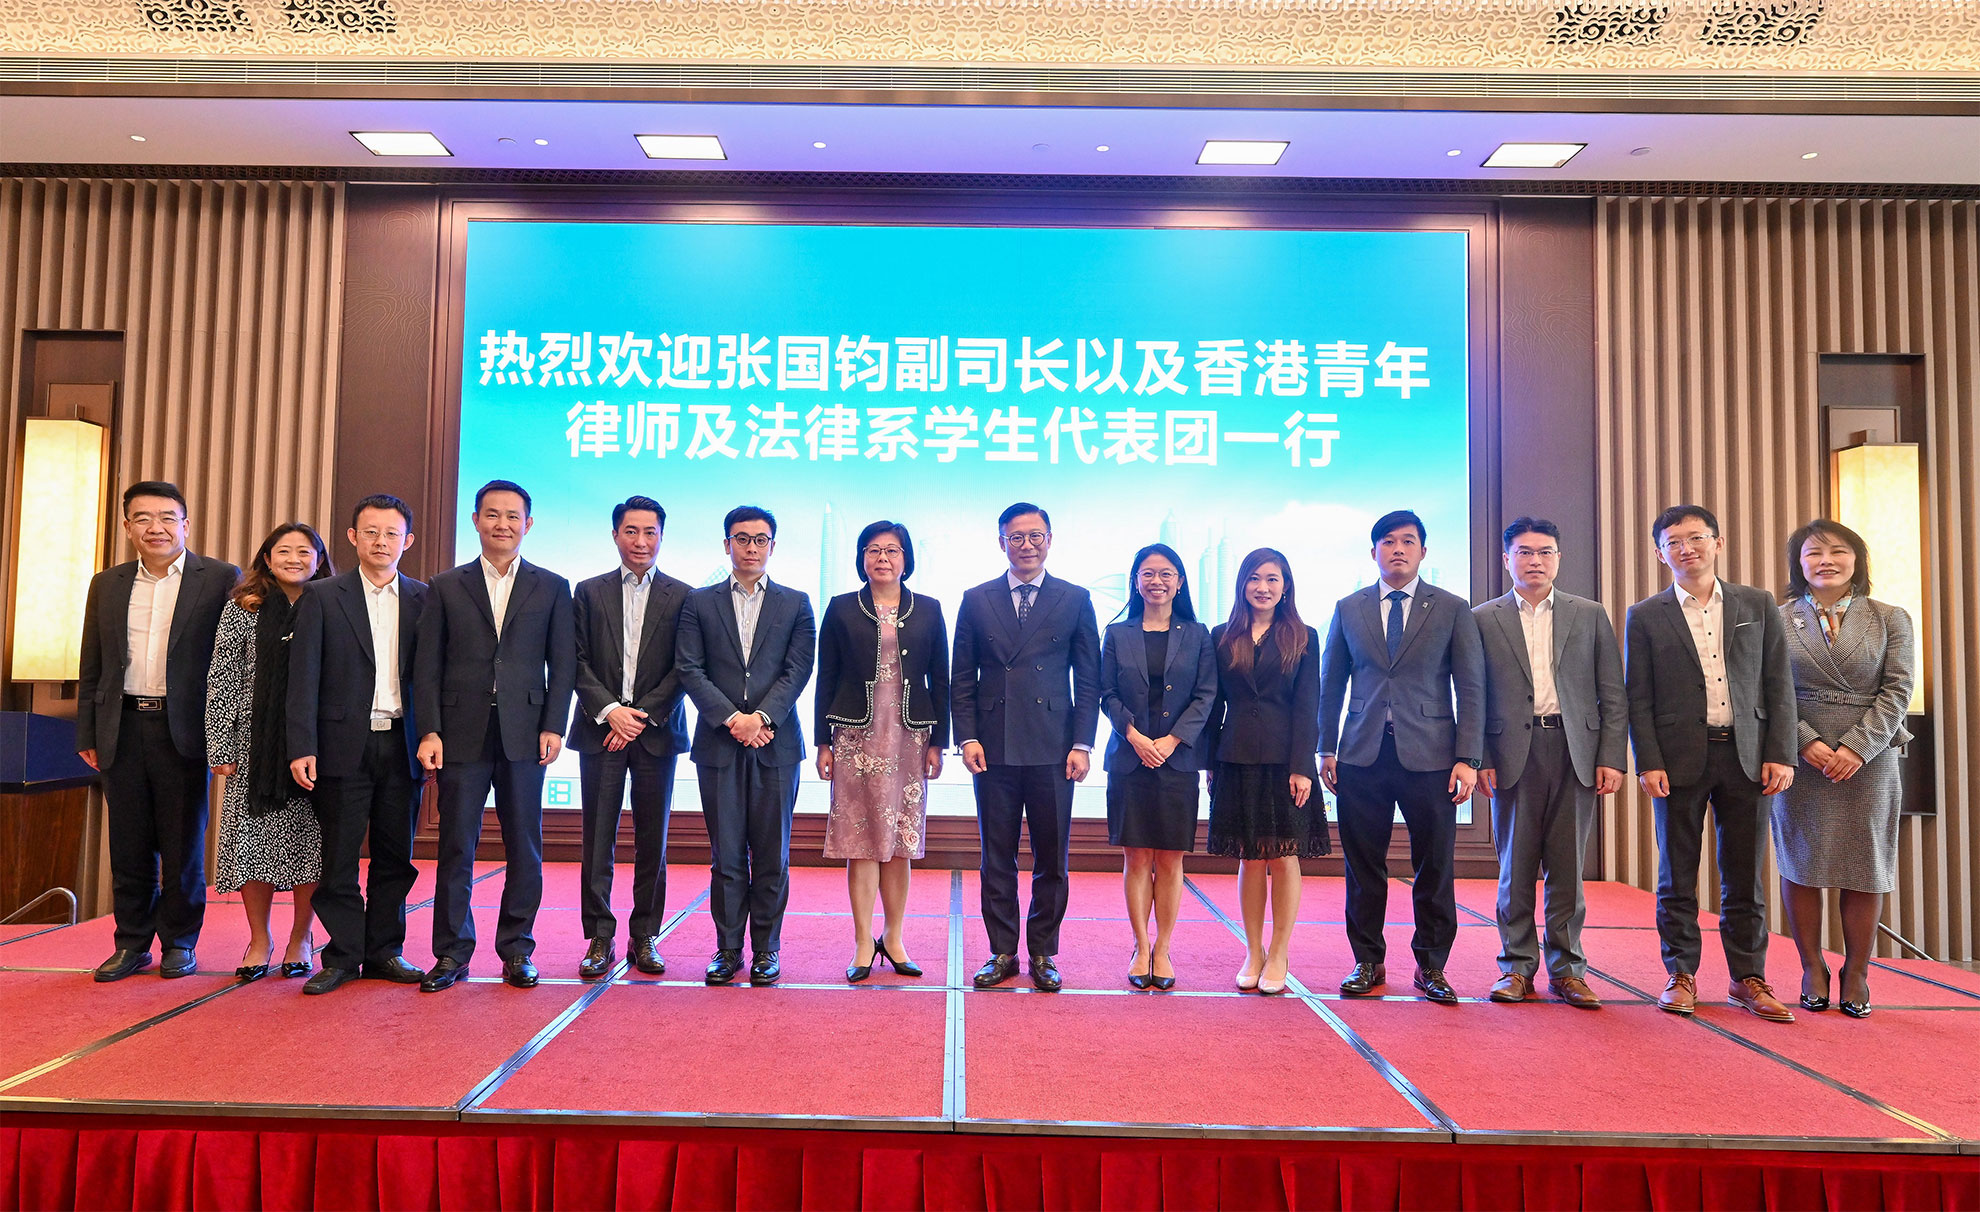 The Deputy Secretary for Justice, Mr Cheung Kwok-kwan, and a delegation of young lawyers led by him today (November 17) finished the first stop, Shenzhen, of their visit to Mainland cities of the Greater Bay Area. Photo shows Mr Cheung (seventh right), the Director of the Justice Bureau of Shenzhen Municipality, Ms Jiang Xiaowen (seventh left), and representatives of senior officials of the Bureau and two legal professional bodies after the meeting.